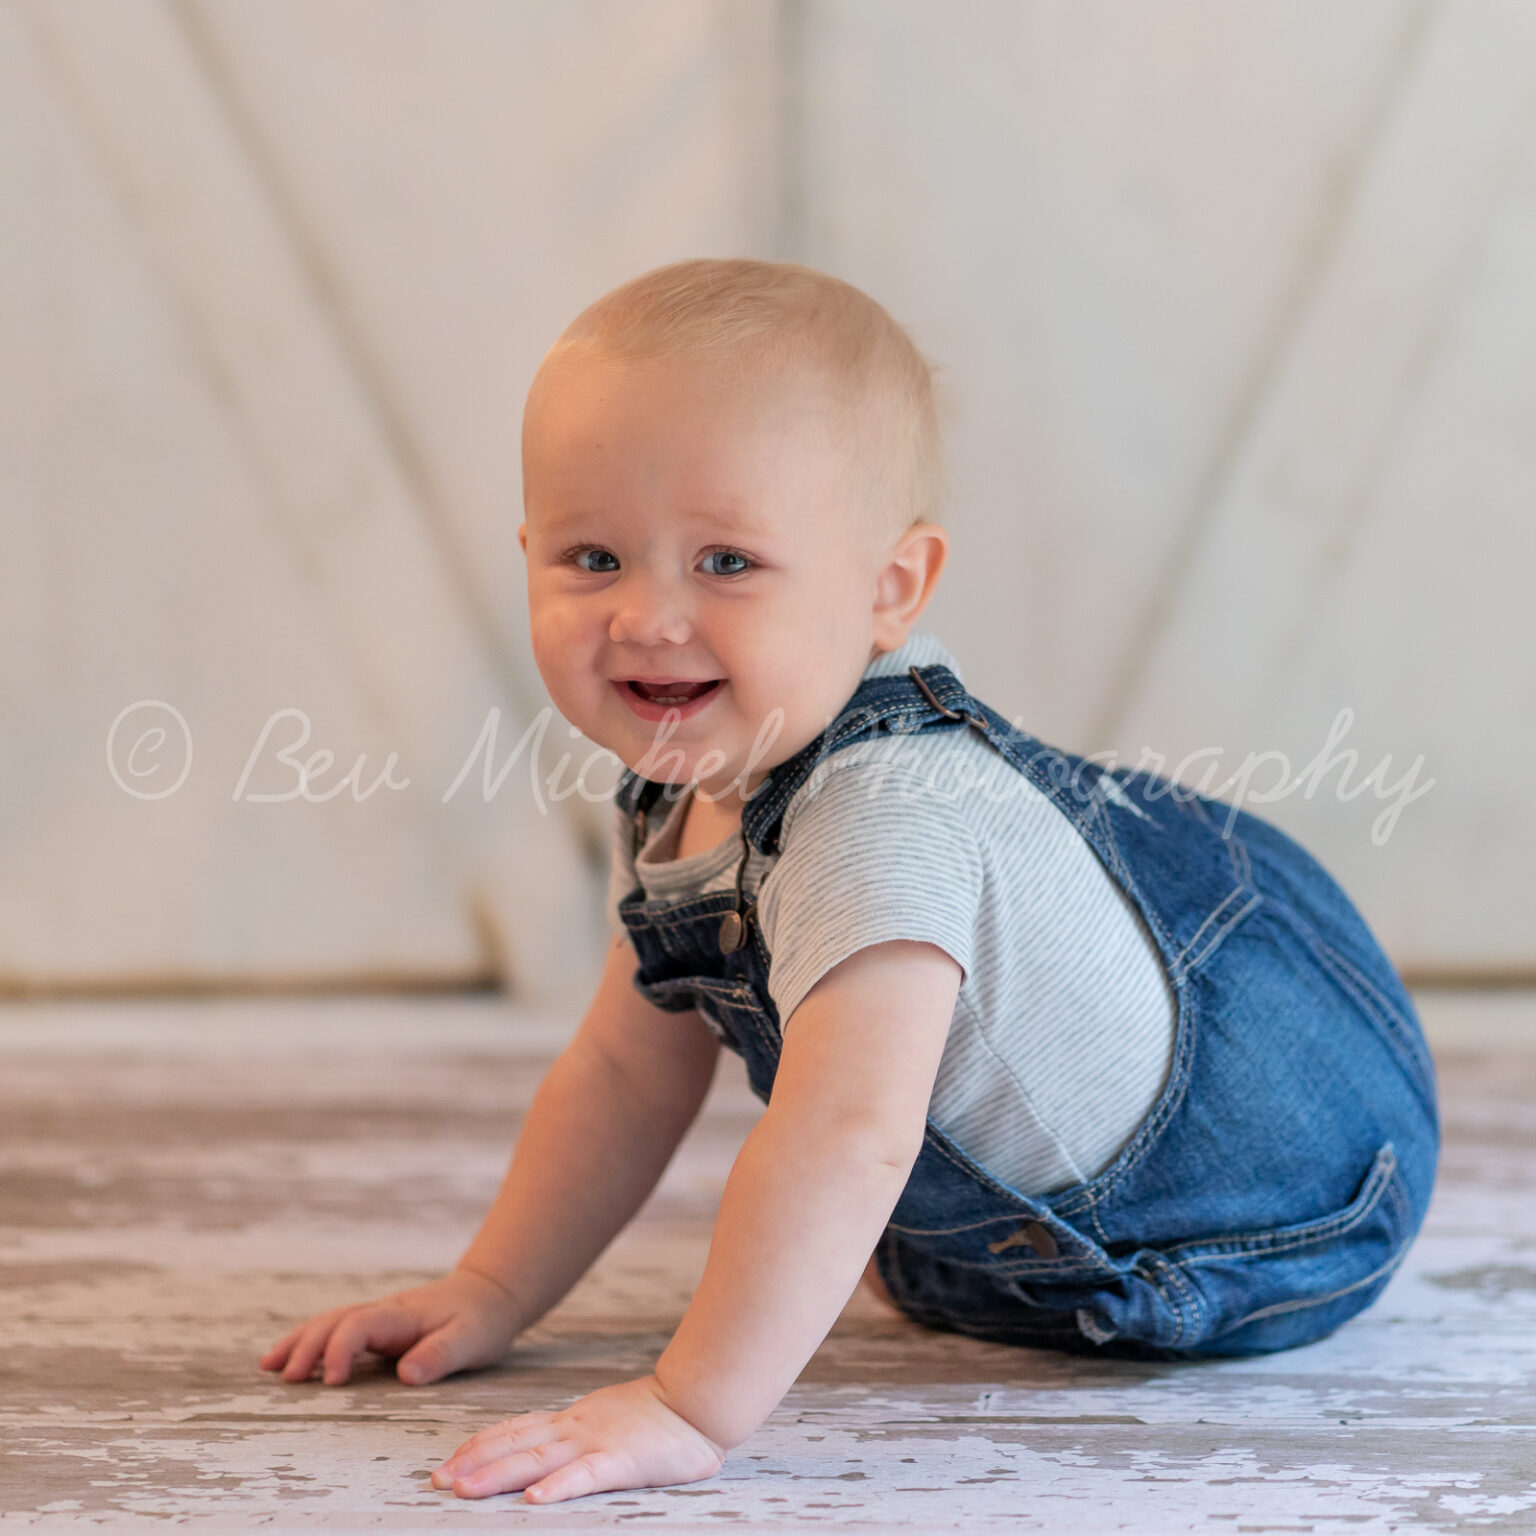 family portrait | Bev Michel Photography – West Chester, PA – Bethany ...